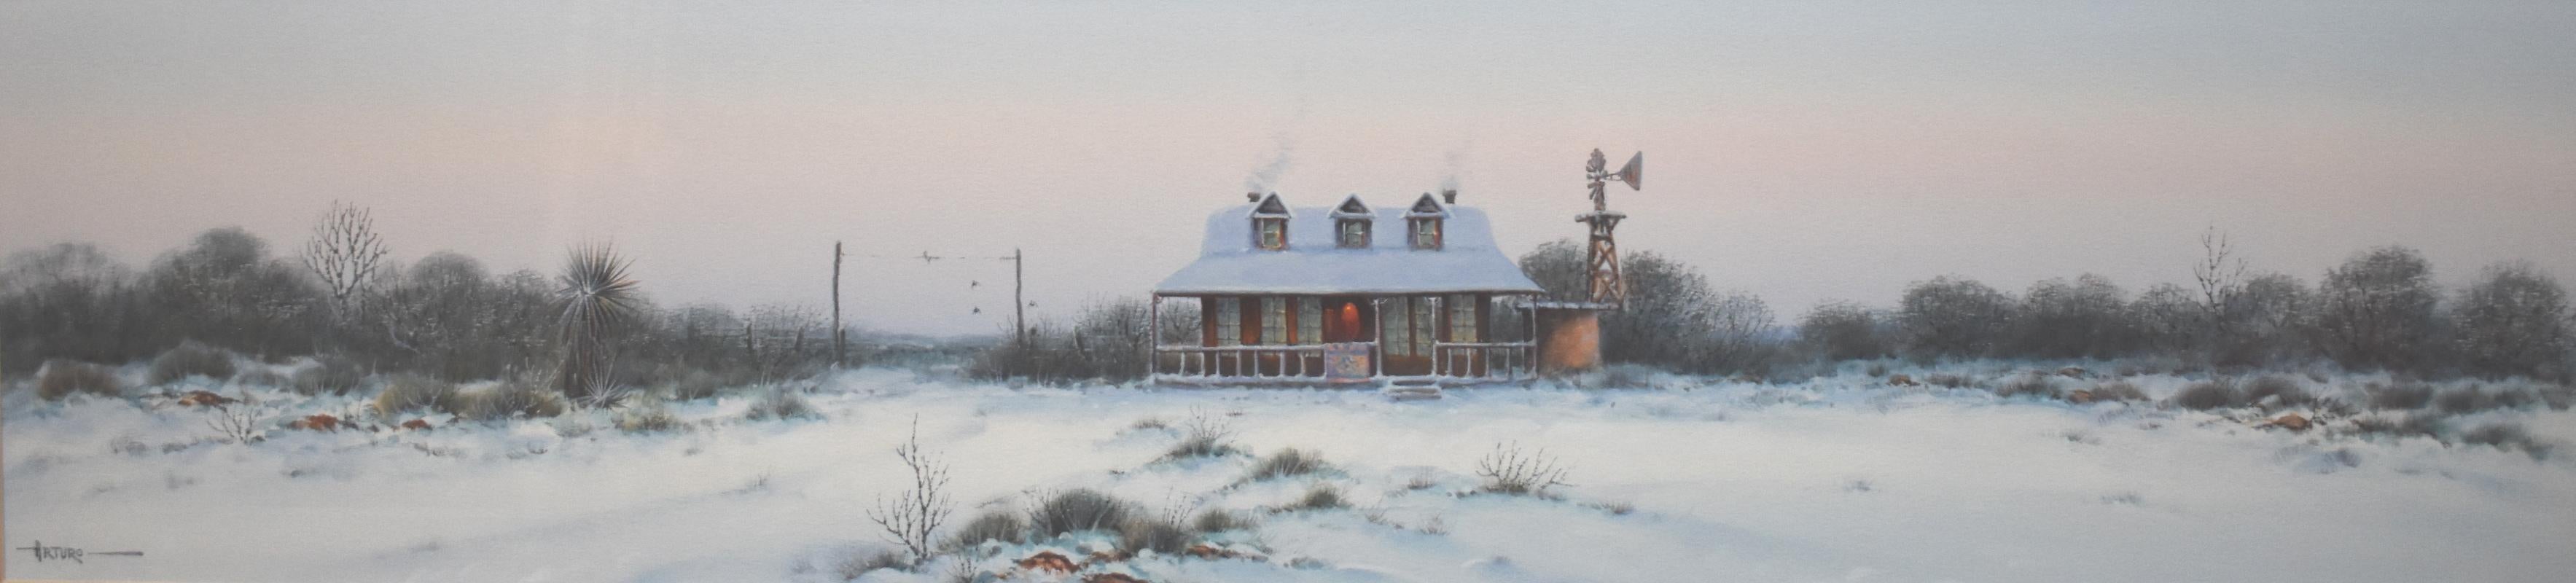 Arturo Mercado Landscape Painting - "Texas Ranch in Snow" #2  Texas Hill Country in Snow 